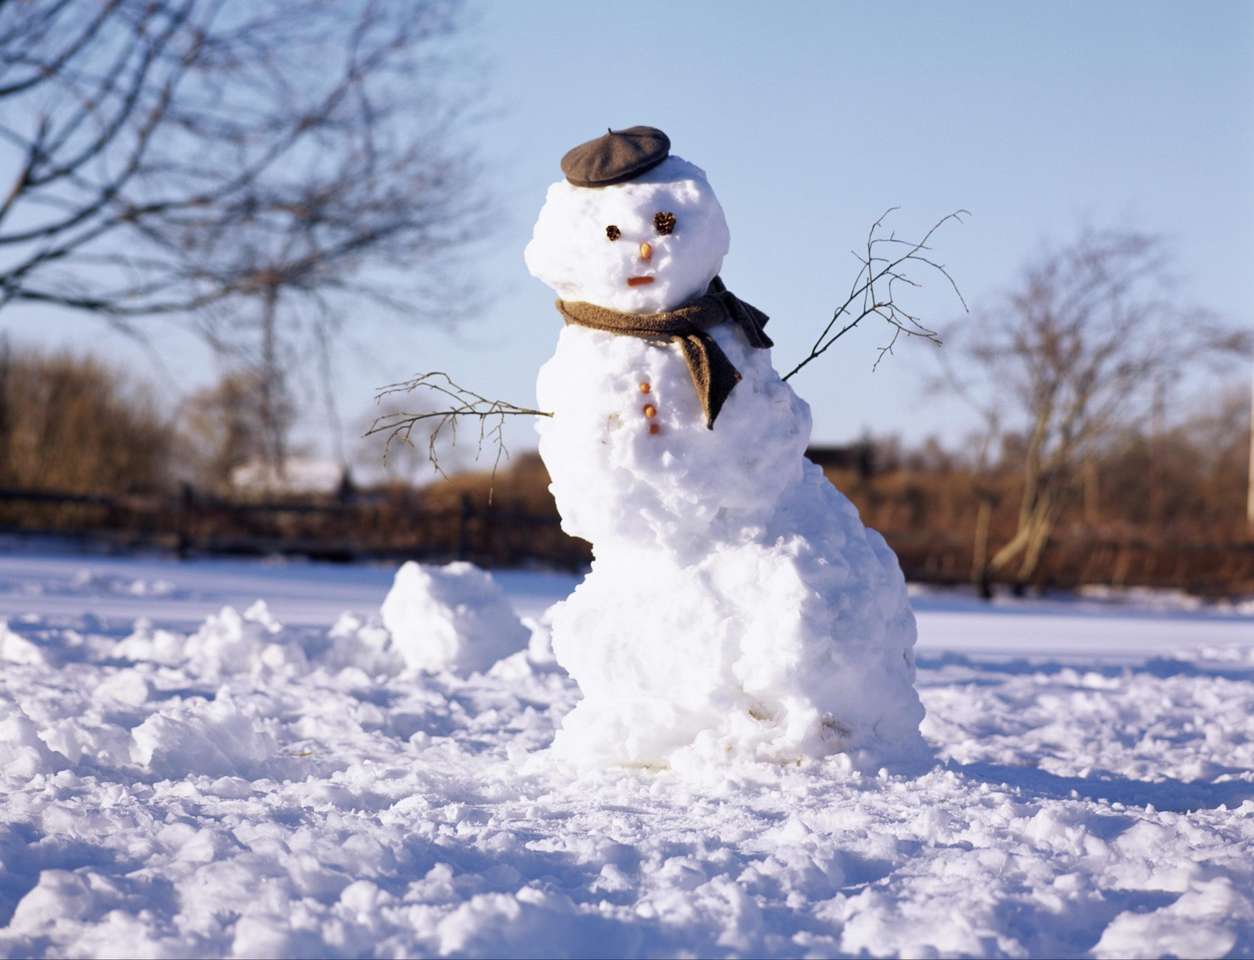 Snowman! puzzle online from photo